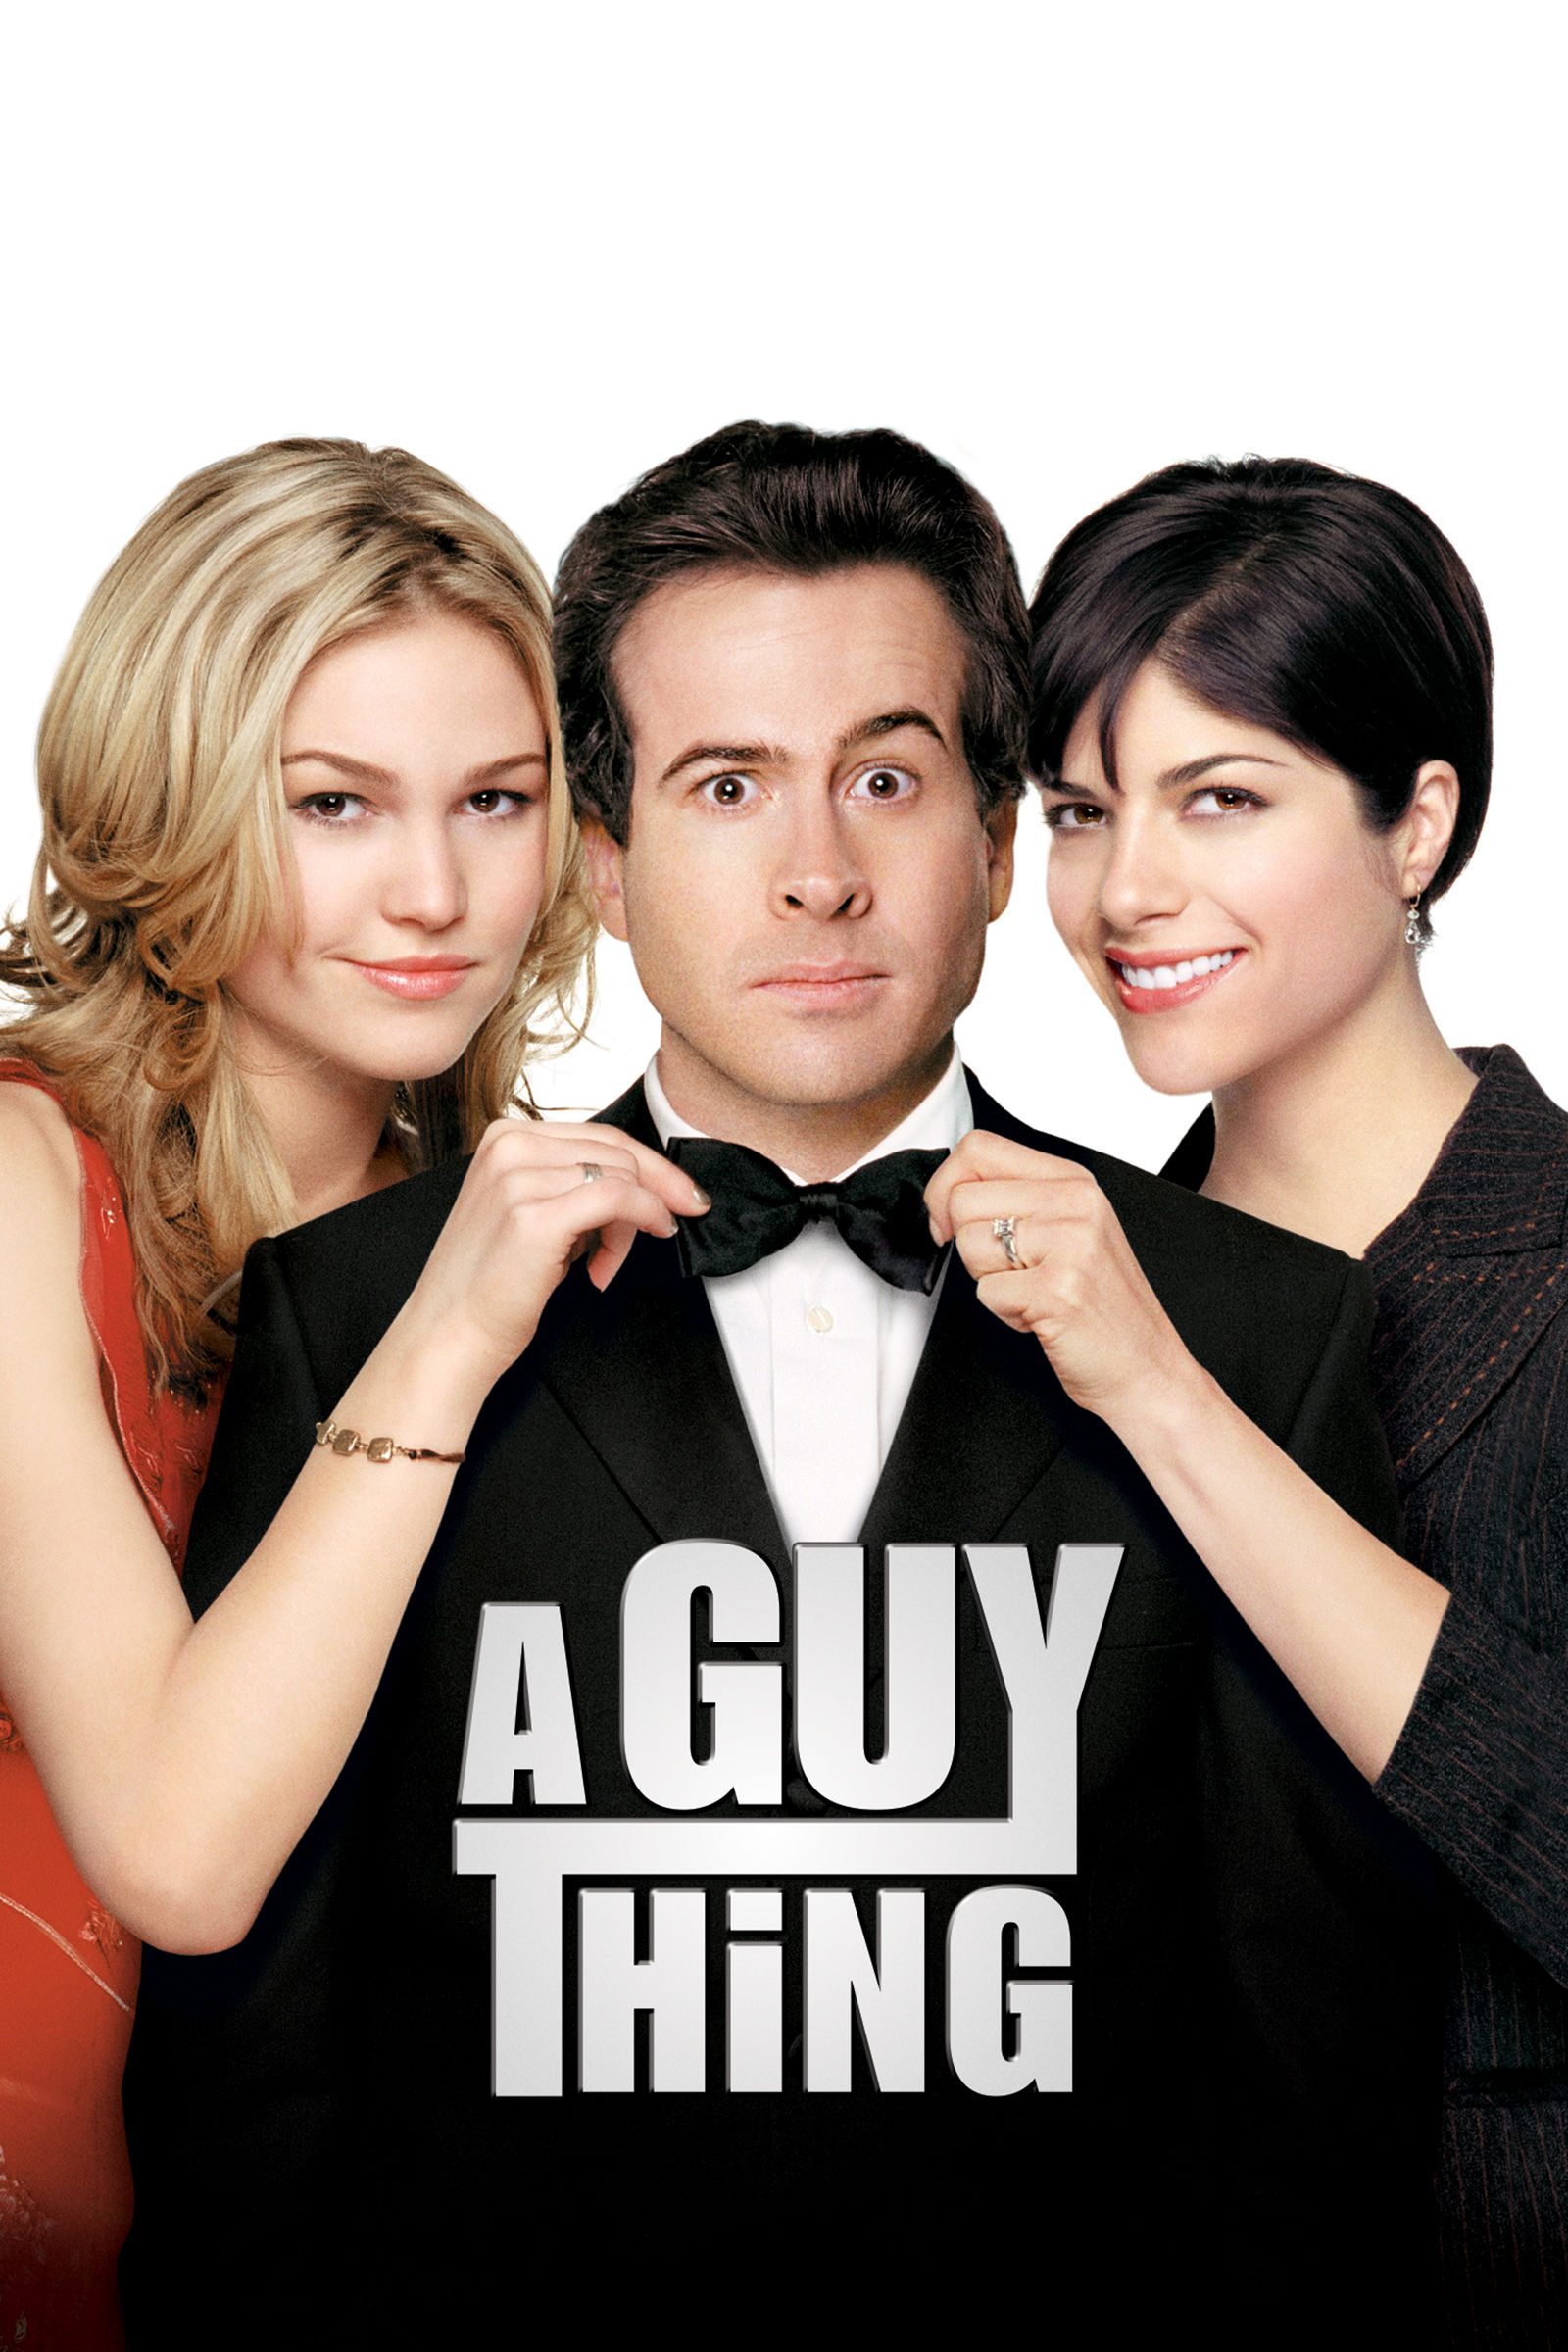 A Guy Thing - watch full movie free